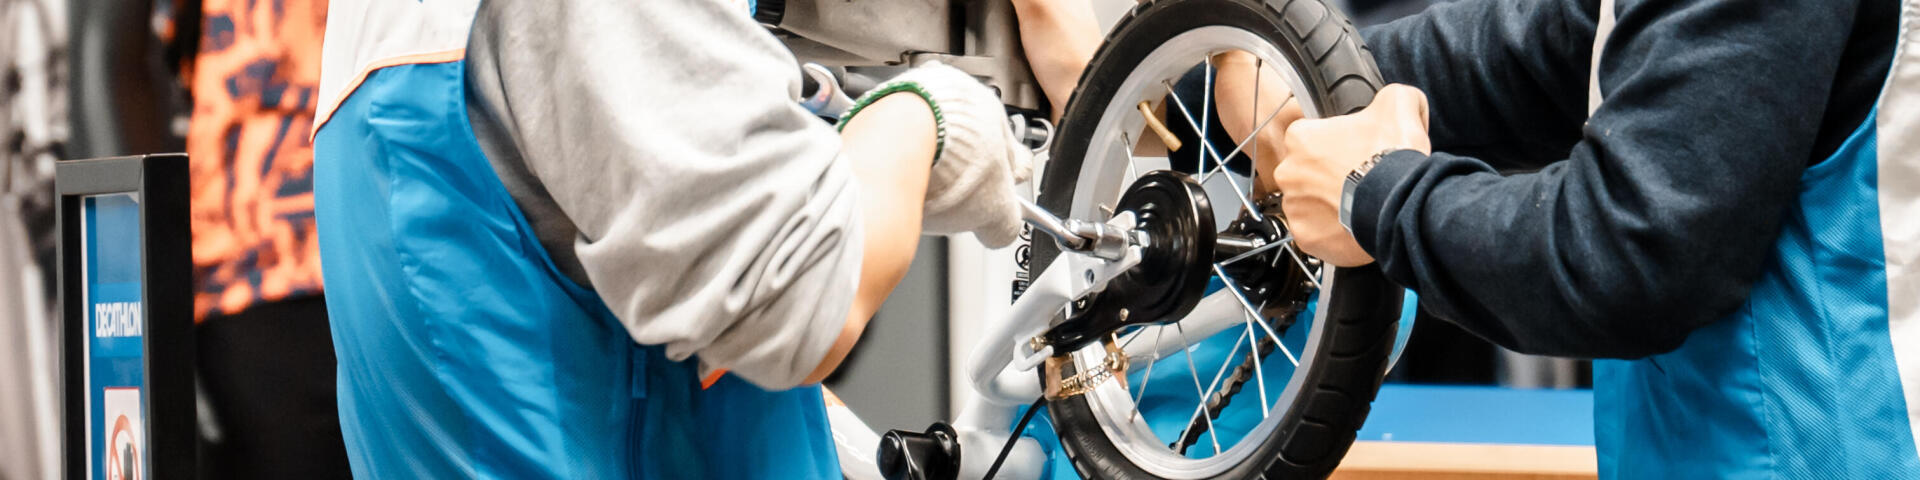 Guide to repairing a punctured tyre Part 1: How to repair